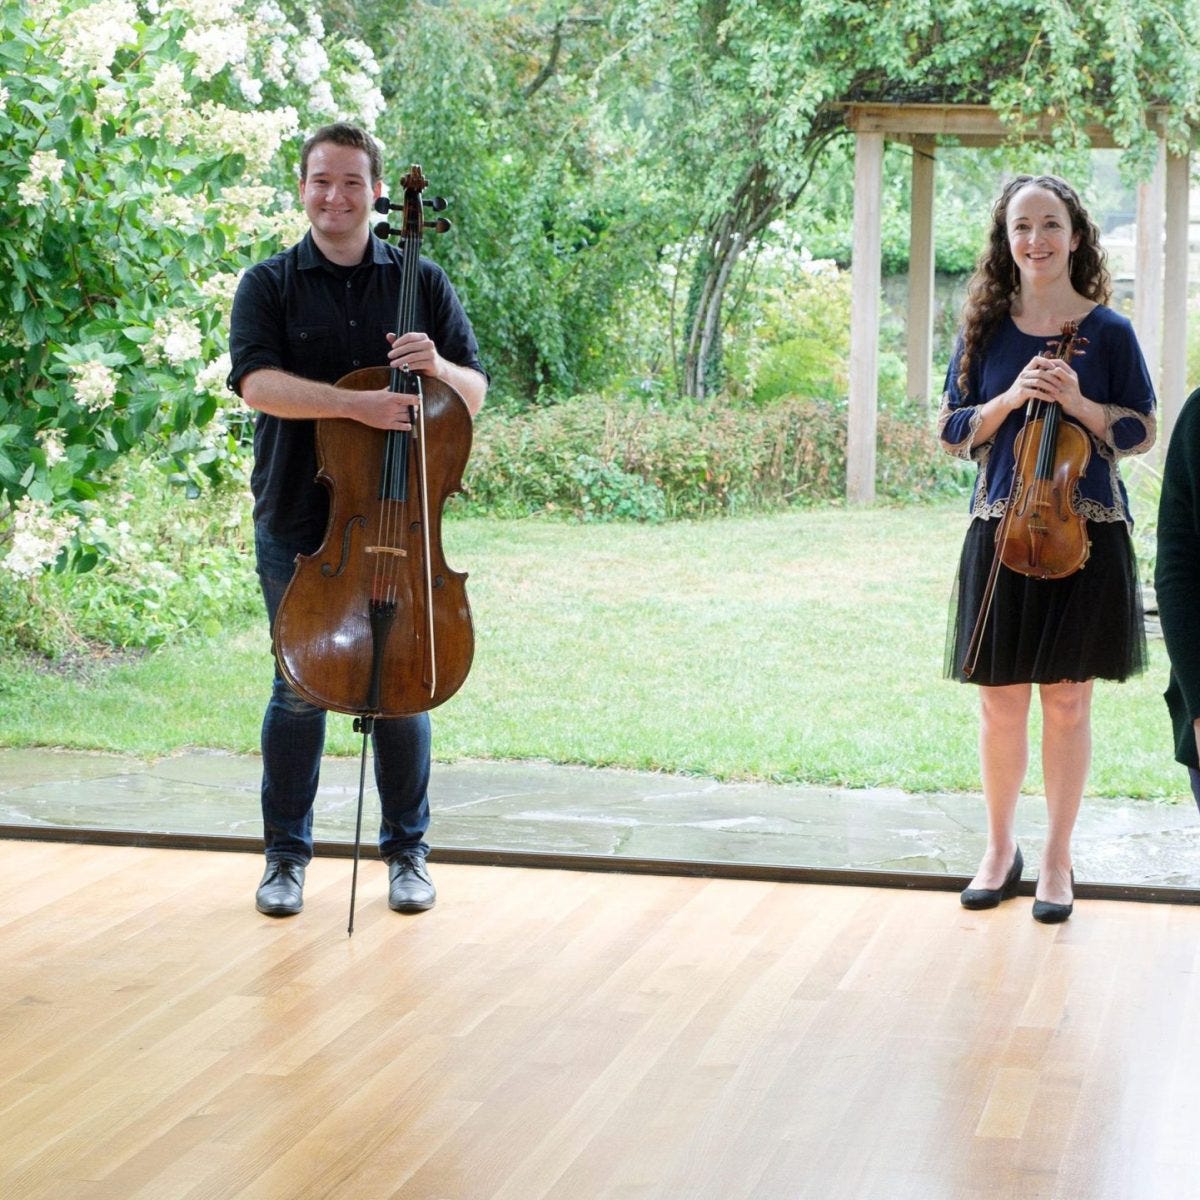 Newport String Project receives recognition from the National Endowment for the Arts